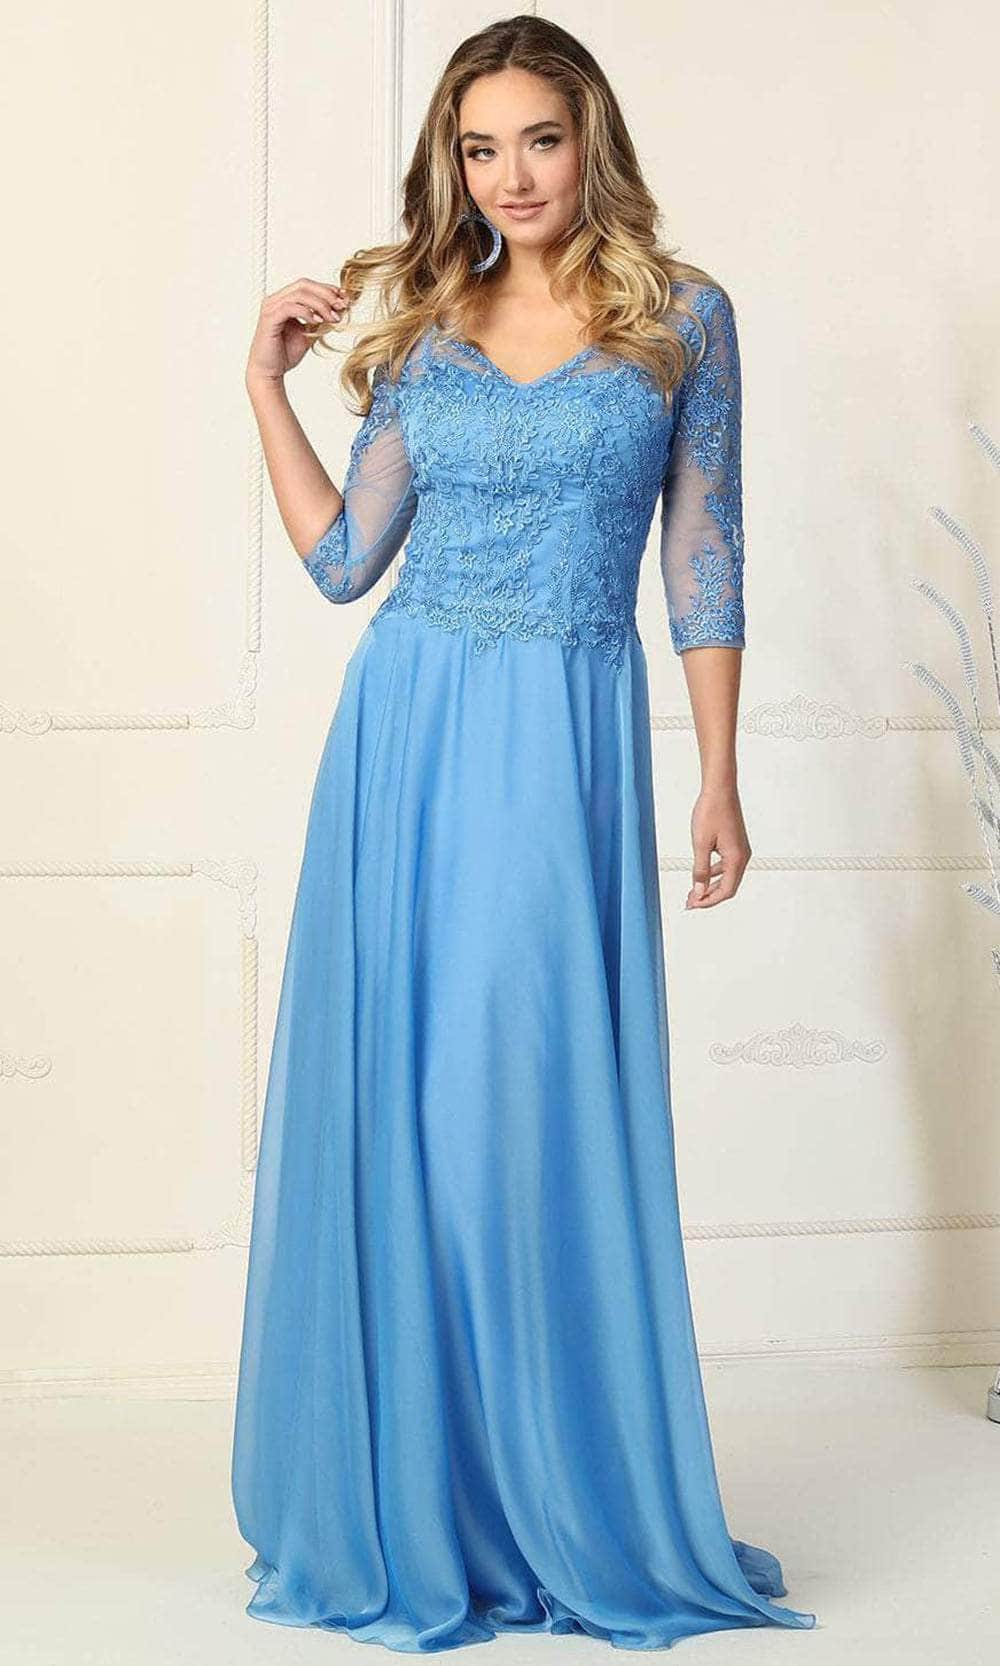 May Queen MQ1860 - Quarter Sleeve A-Line Long Dress Prom Dresses S / Perry Blue